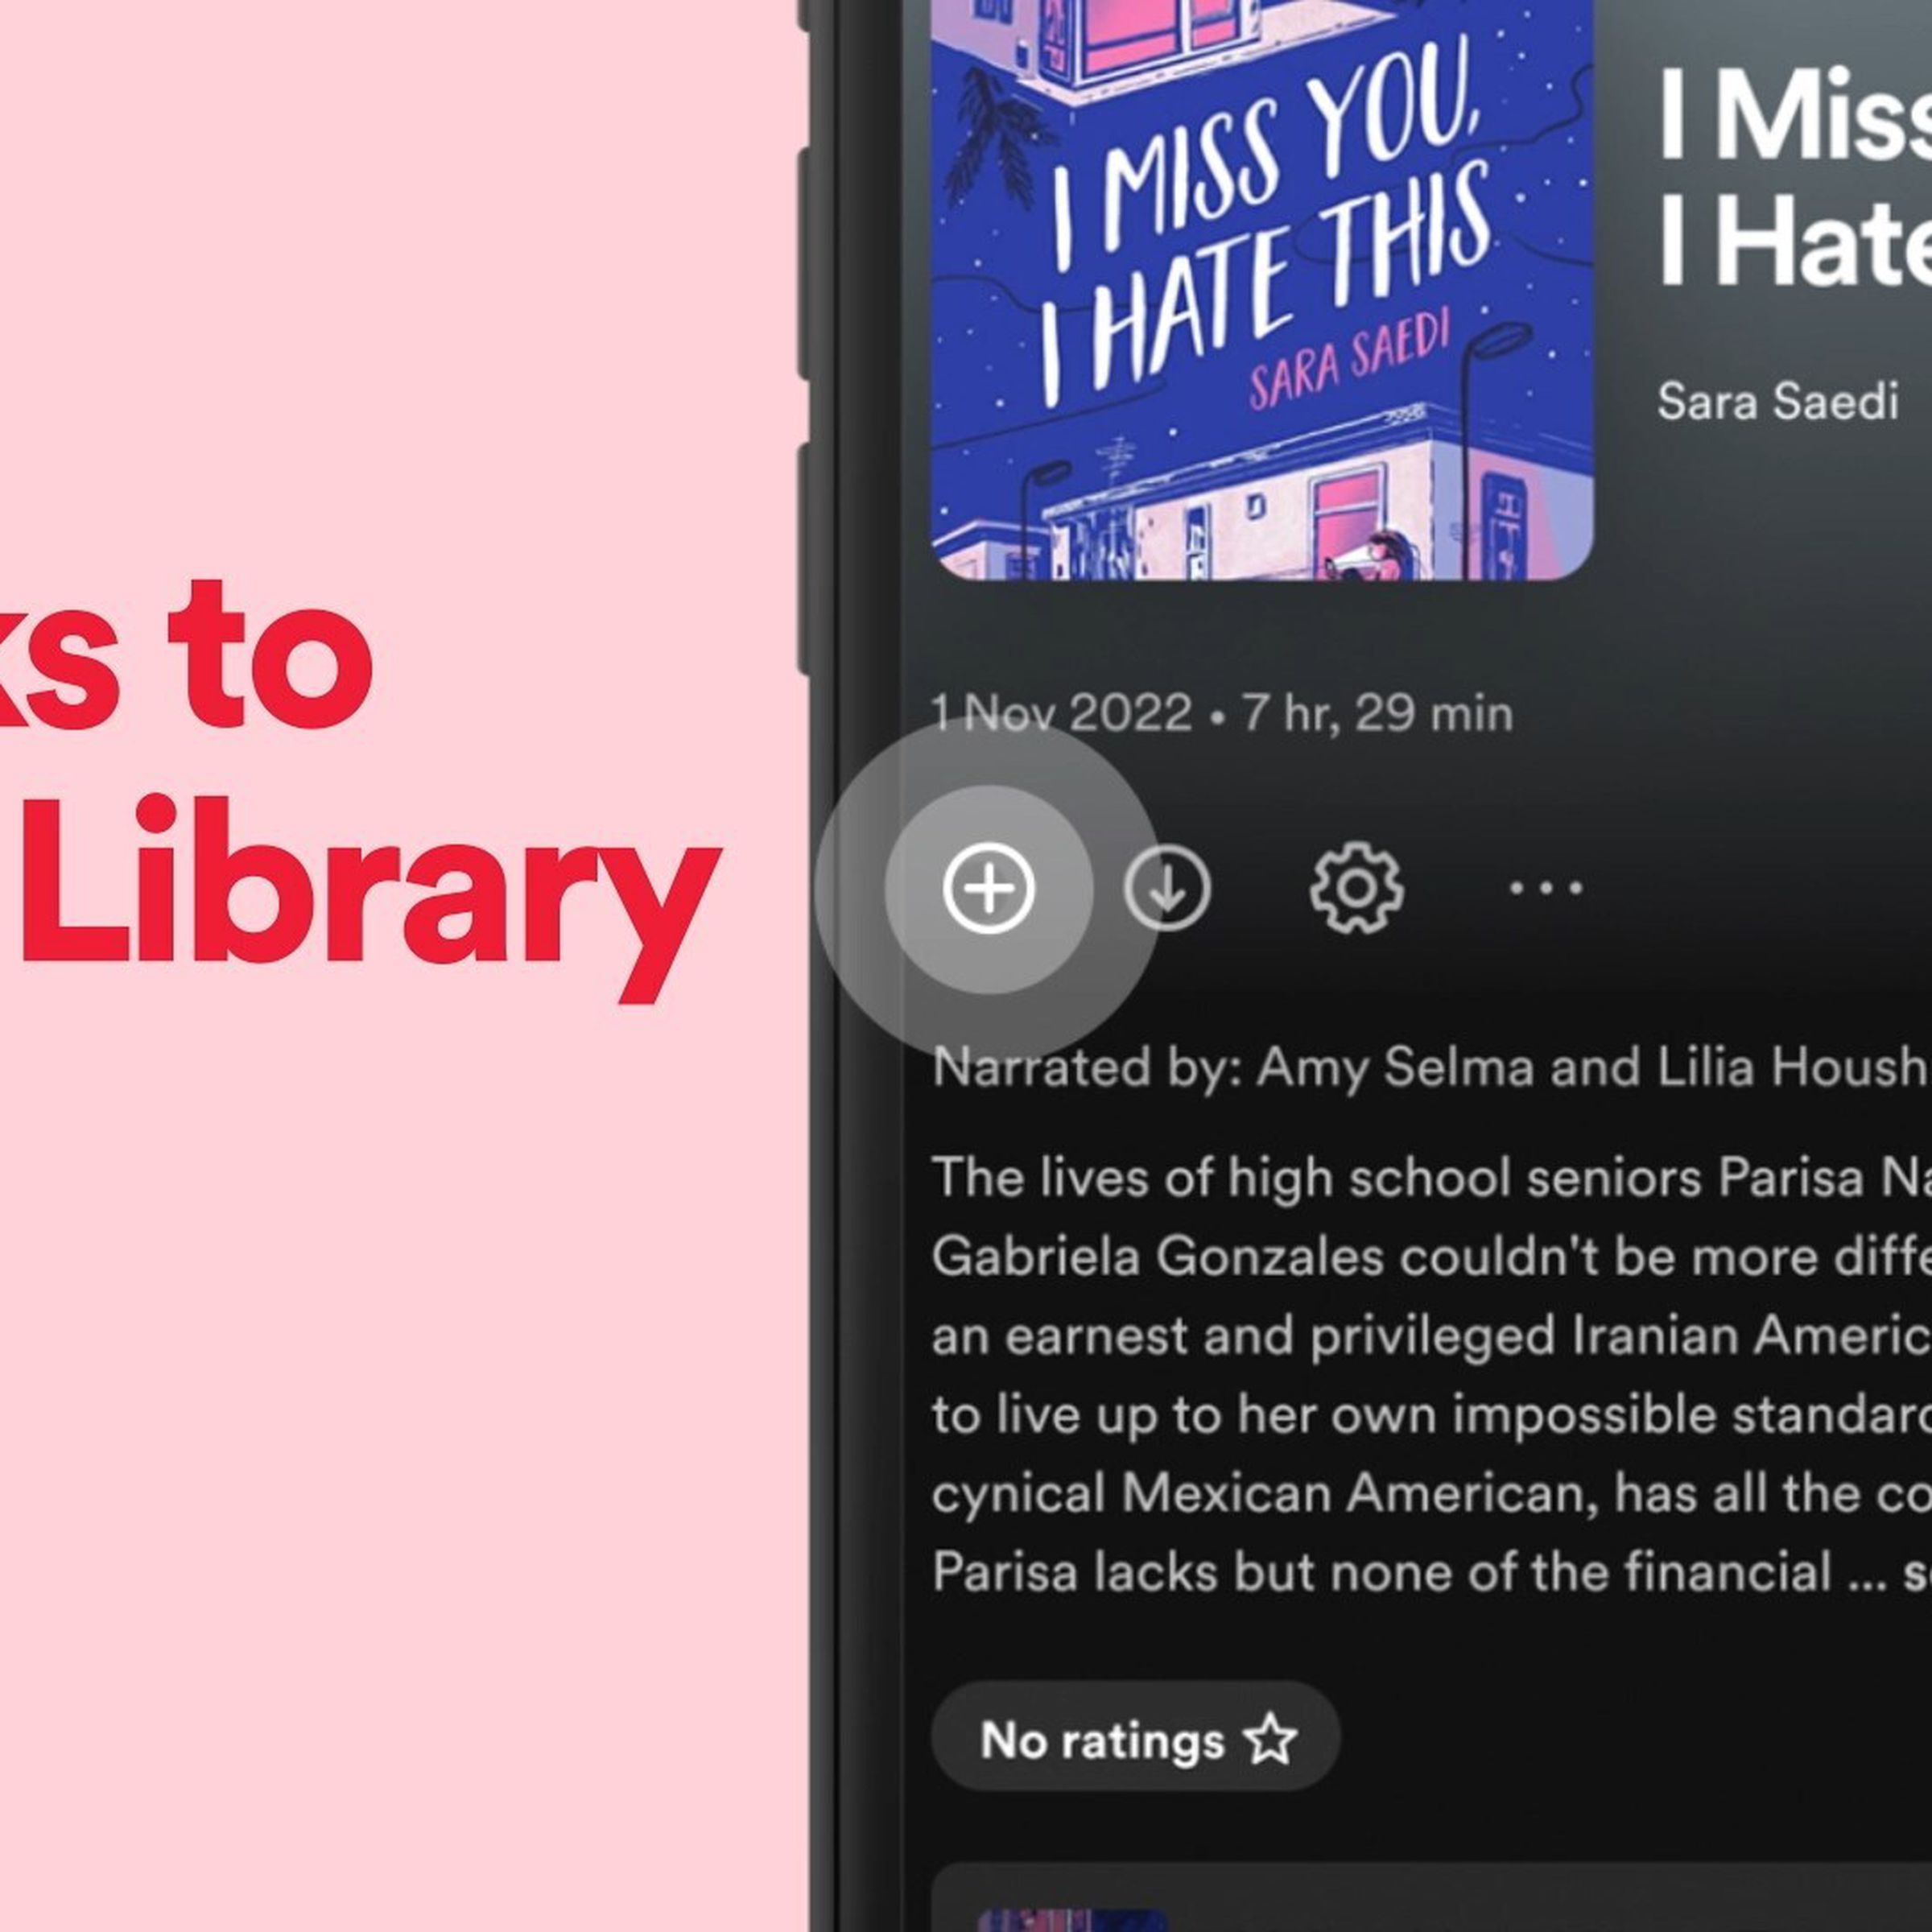 A screenshot showing Spotify’s new plus button next to a book titled I Miss You, I Hate This.